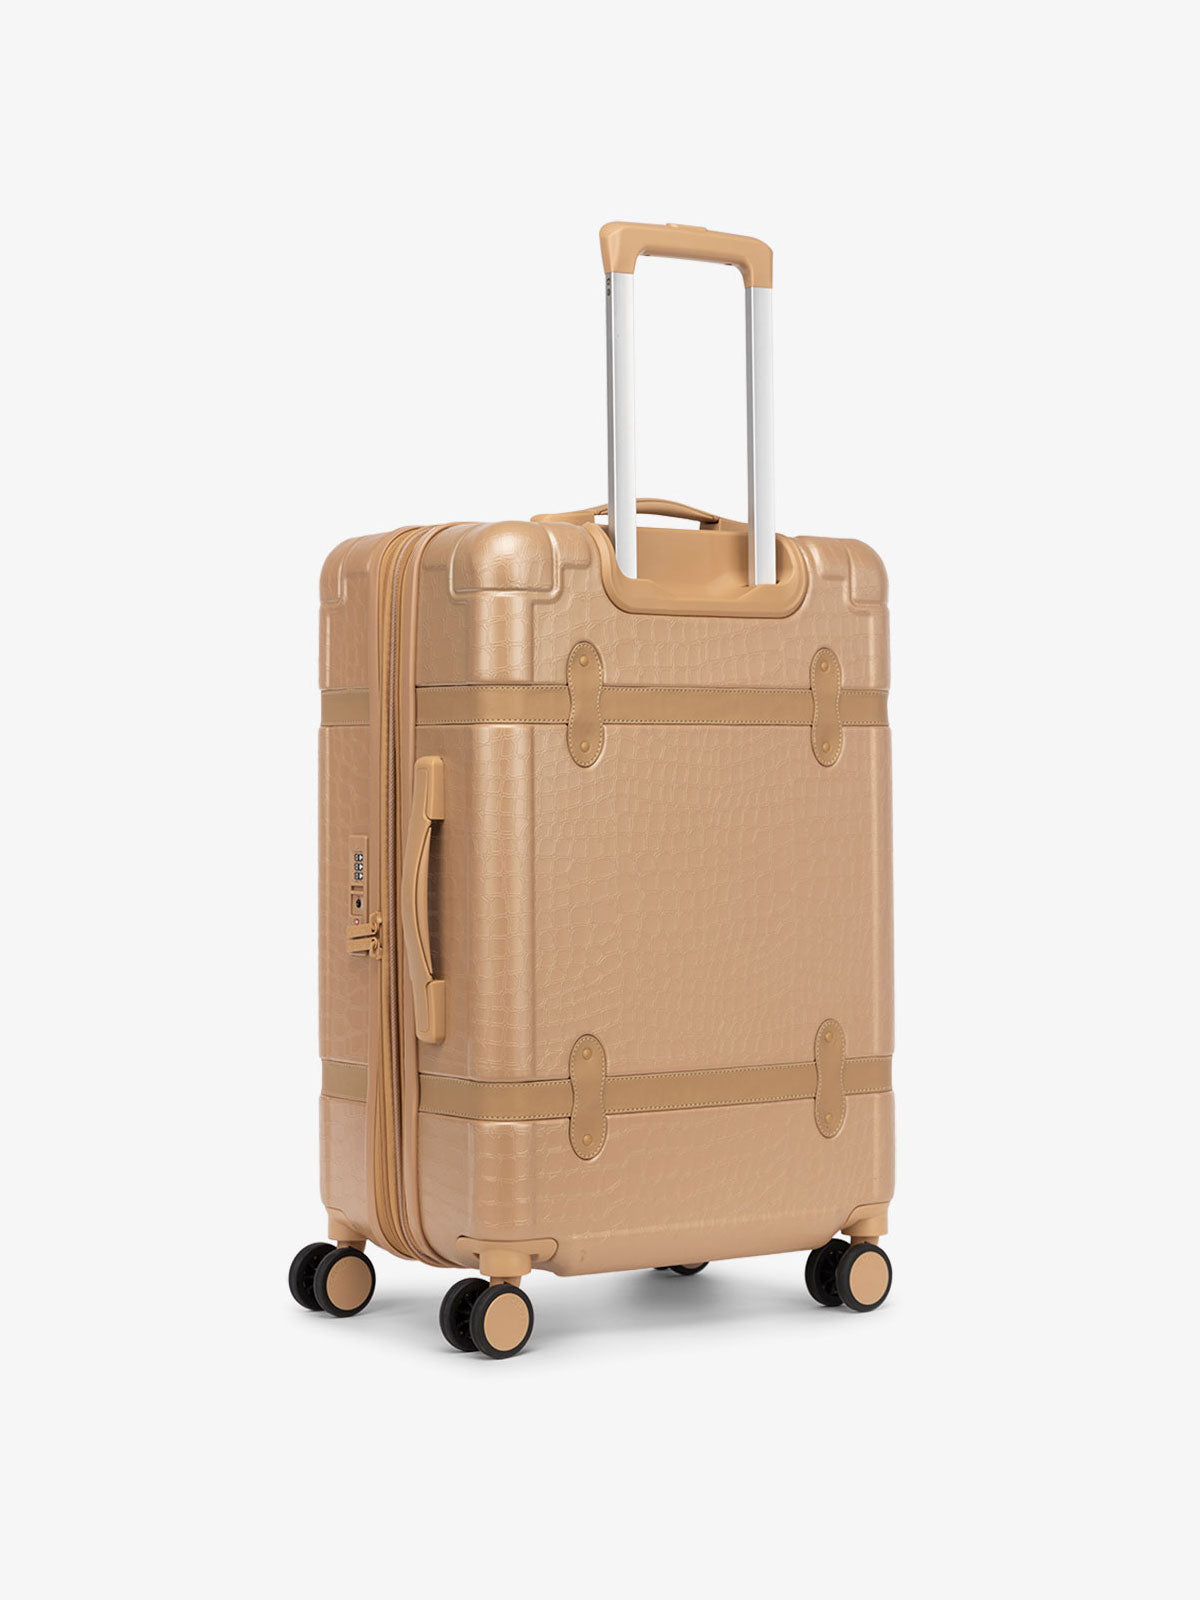 Calpak TRNK Collection Luggage Review